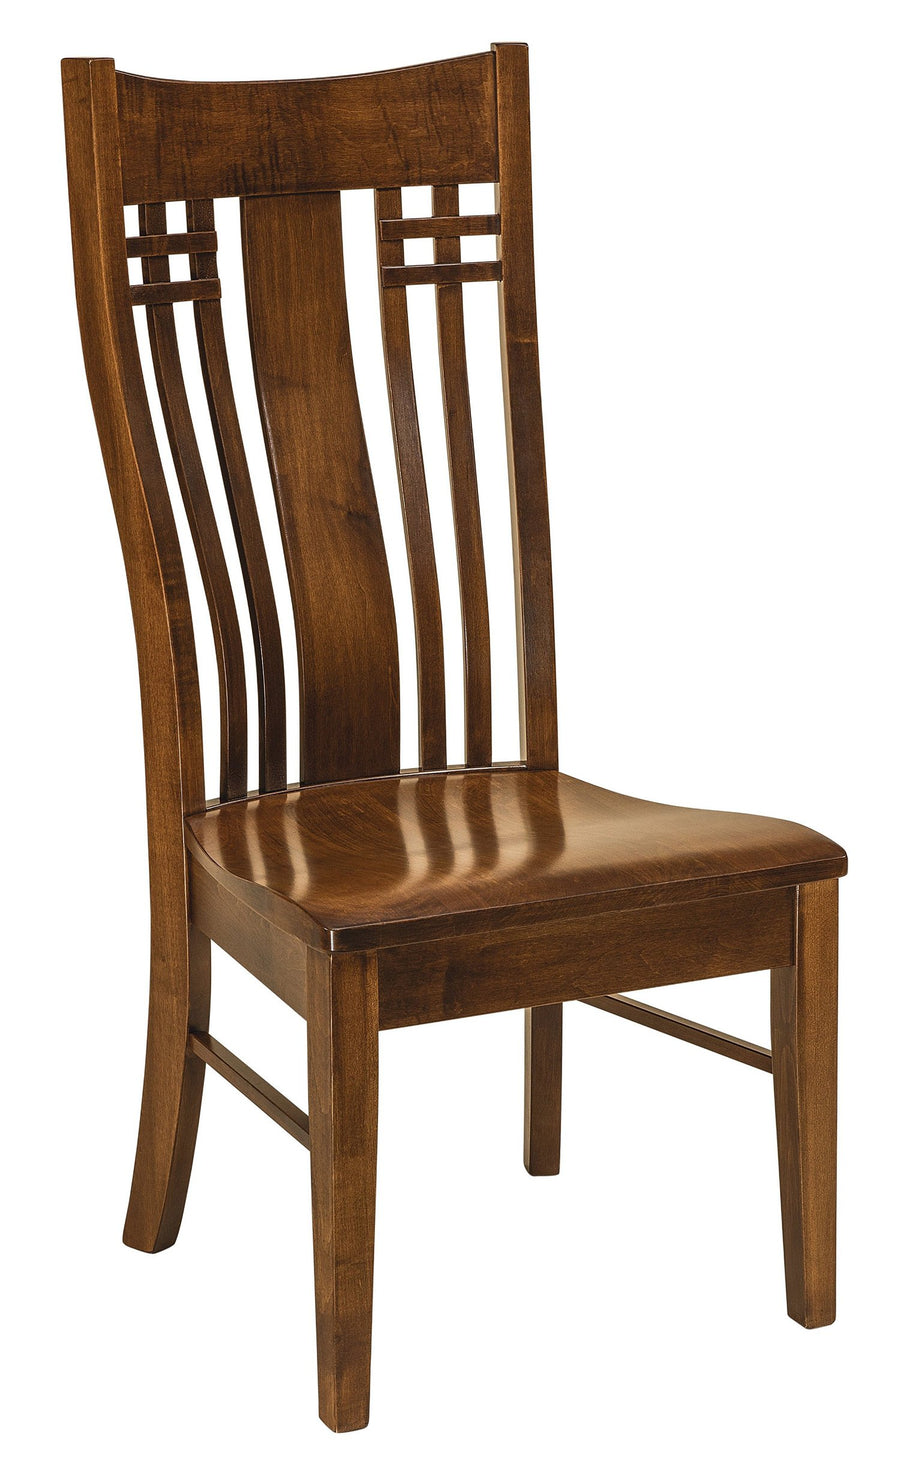 Bennett Amish Side Chair - Foothills Amish Furniture